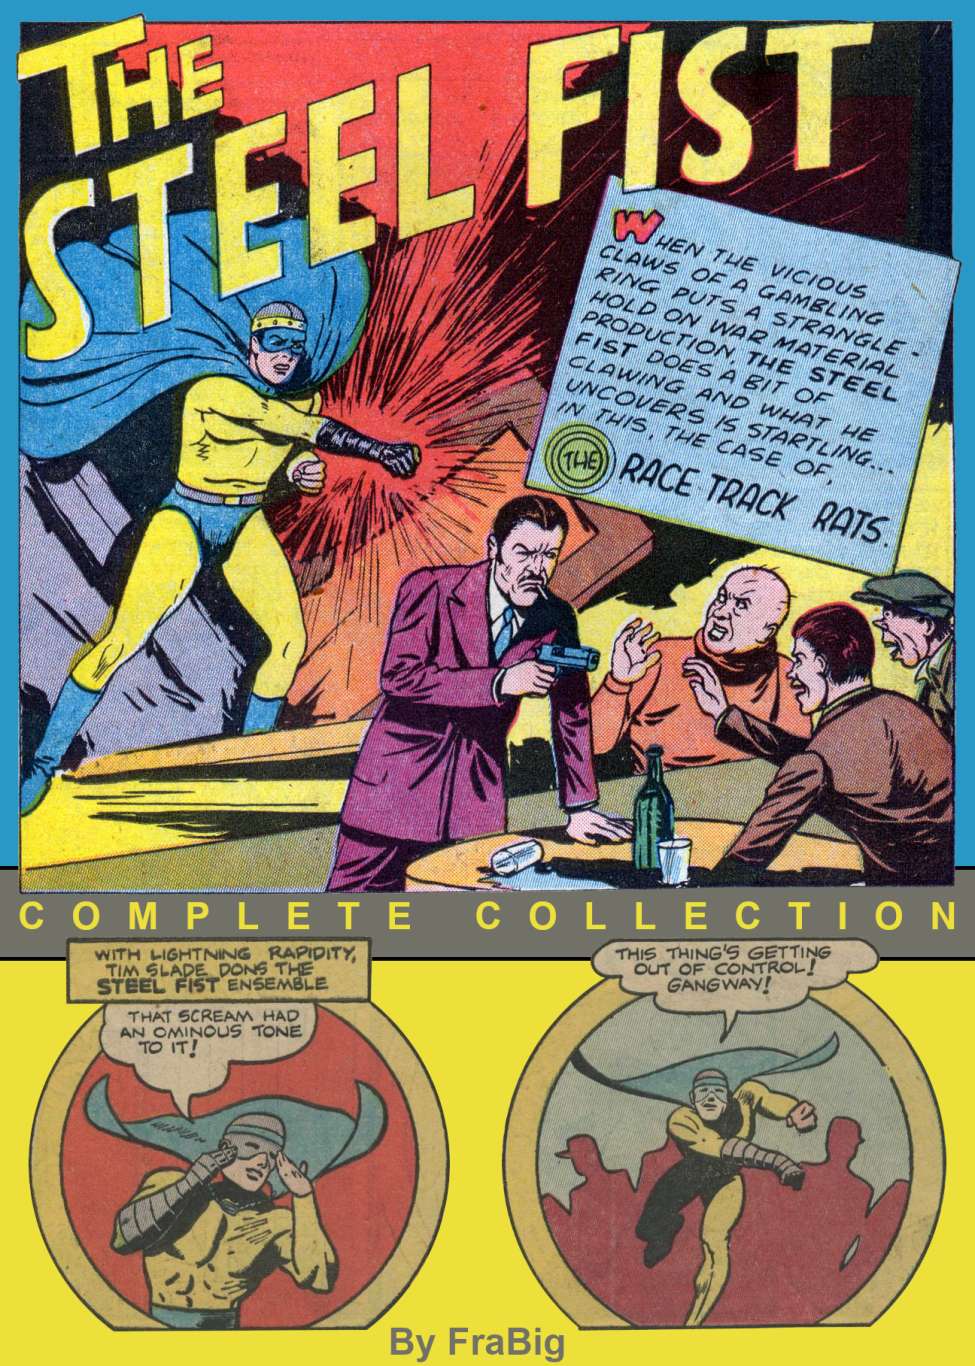 Comic Book Cover For Steel Fist Complete Collection